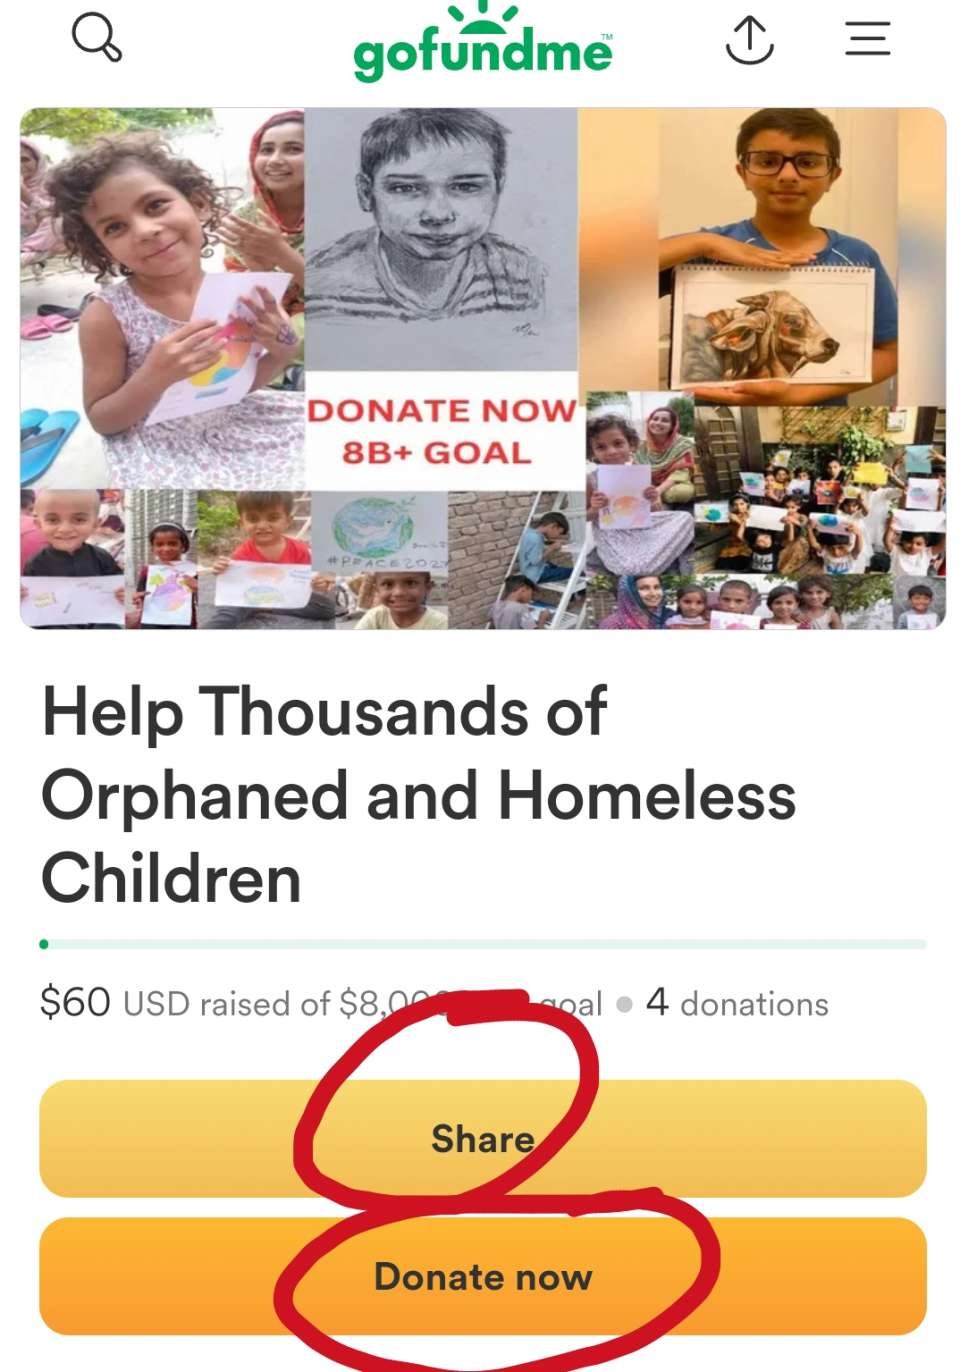 Good morning my dear  it needs your  just 4+ shares and/or donation 👍 can you do it happily Today?<br /><br /> thank you very much my dear Global family 🌎❤<br /><br />for joining hands DAILY, for now we raise 60$.<br /><br />Lets accelerate  to raiseup 1000$+ today<br /><br />in simple steps:<br /><br />share this Urgent campaign https://gofund.me/74b84d5b<br /><br />in all social networks<br /><br />at list 10 times +<br /><br />in Facebook LinkedIn Twitter and with your friends and contacts<br /><br />let's do a BIG IMPACT TODAY TO<br /><br /> GO VIRAL ok?<br /><br />Make a donation 10$+ by possibility today and write your heart 💖 touching  support message today on GoFoundme<br /><br />Please put + to this message who SHARE this today<br /><br />Enjoy Video REPORT  https://youtu.be/bTNCgRA0vlg<br /><br />IMPORTANT In the bright memory of Daniil, year around Famous drawing Contest for #Peace2027 is held, as Daniil has been drawing #PeacePictures in last days, we invite you to<br /><br />Happily donate today to the Daniil Foundation to support his cause https://www.gofundme.com/f/help-thousands-of-orphaned-and-homeless-children https://ivacademy.net/en/donate  <br /><br />Enjoy Sharing today this foundation with friends and wide in social networks to GRANT you and  all 8B+ people participate and complete ultimate Global peace building by 2027 in every country ok?